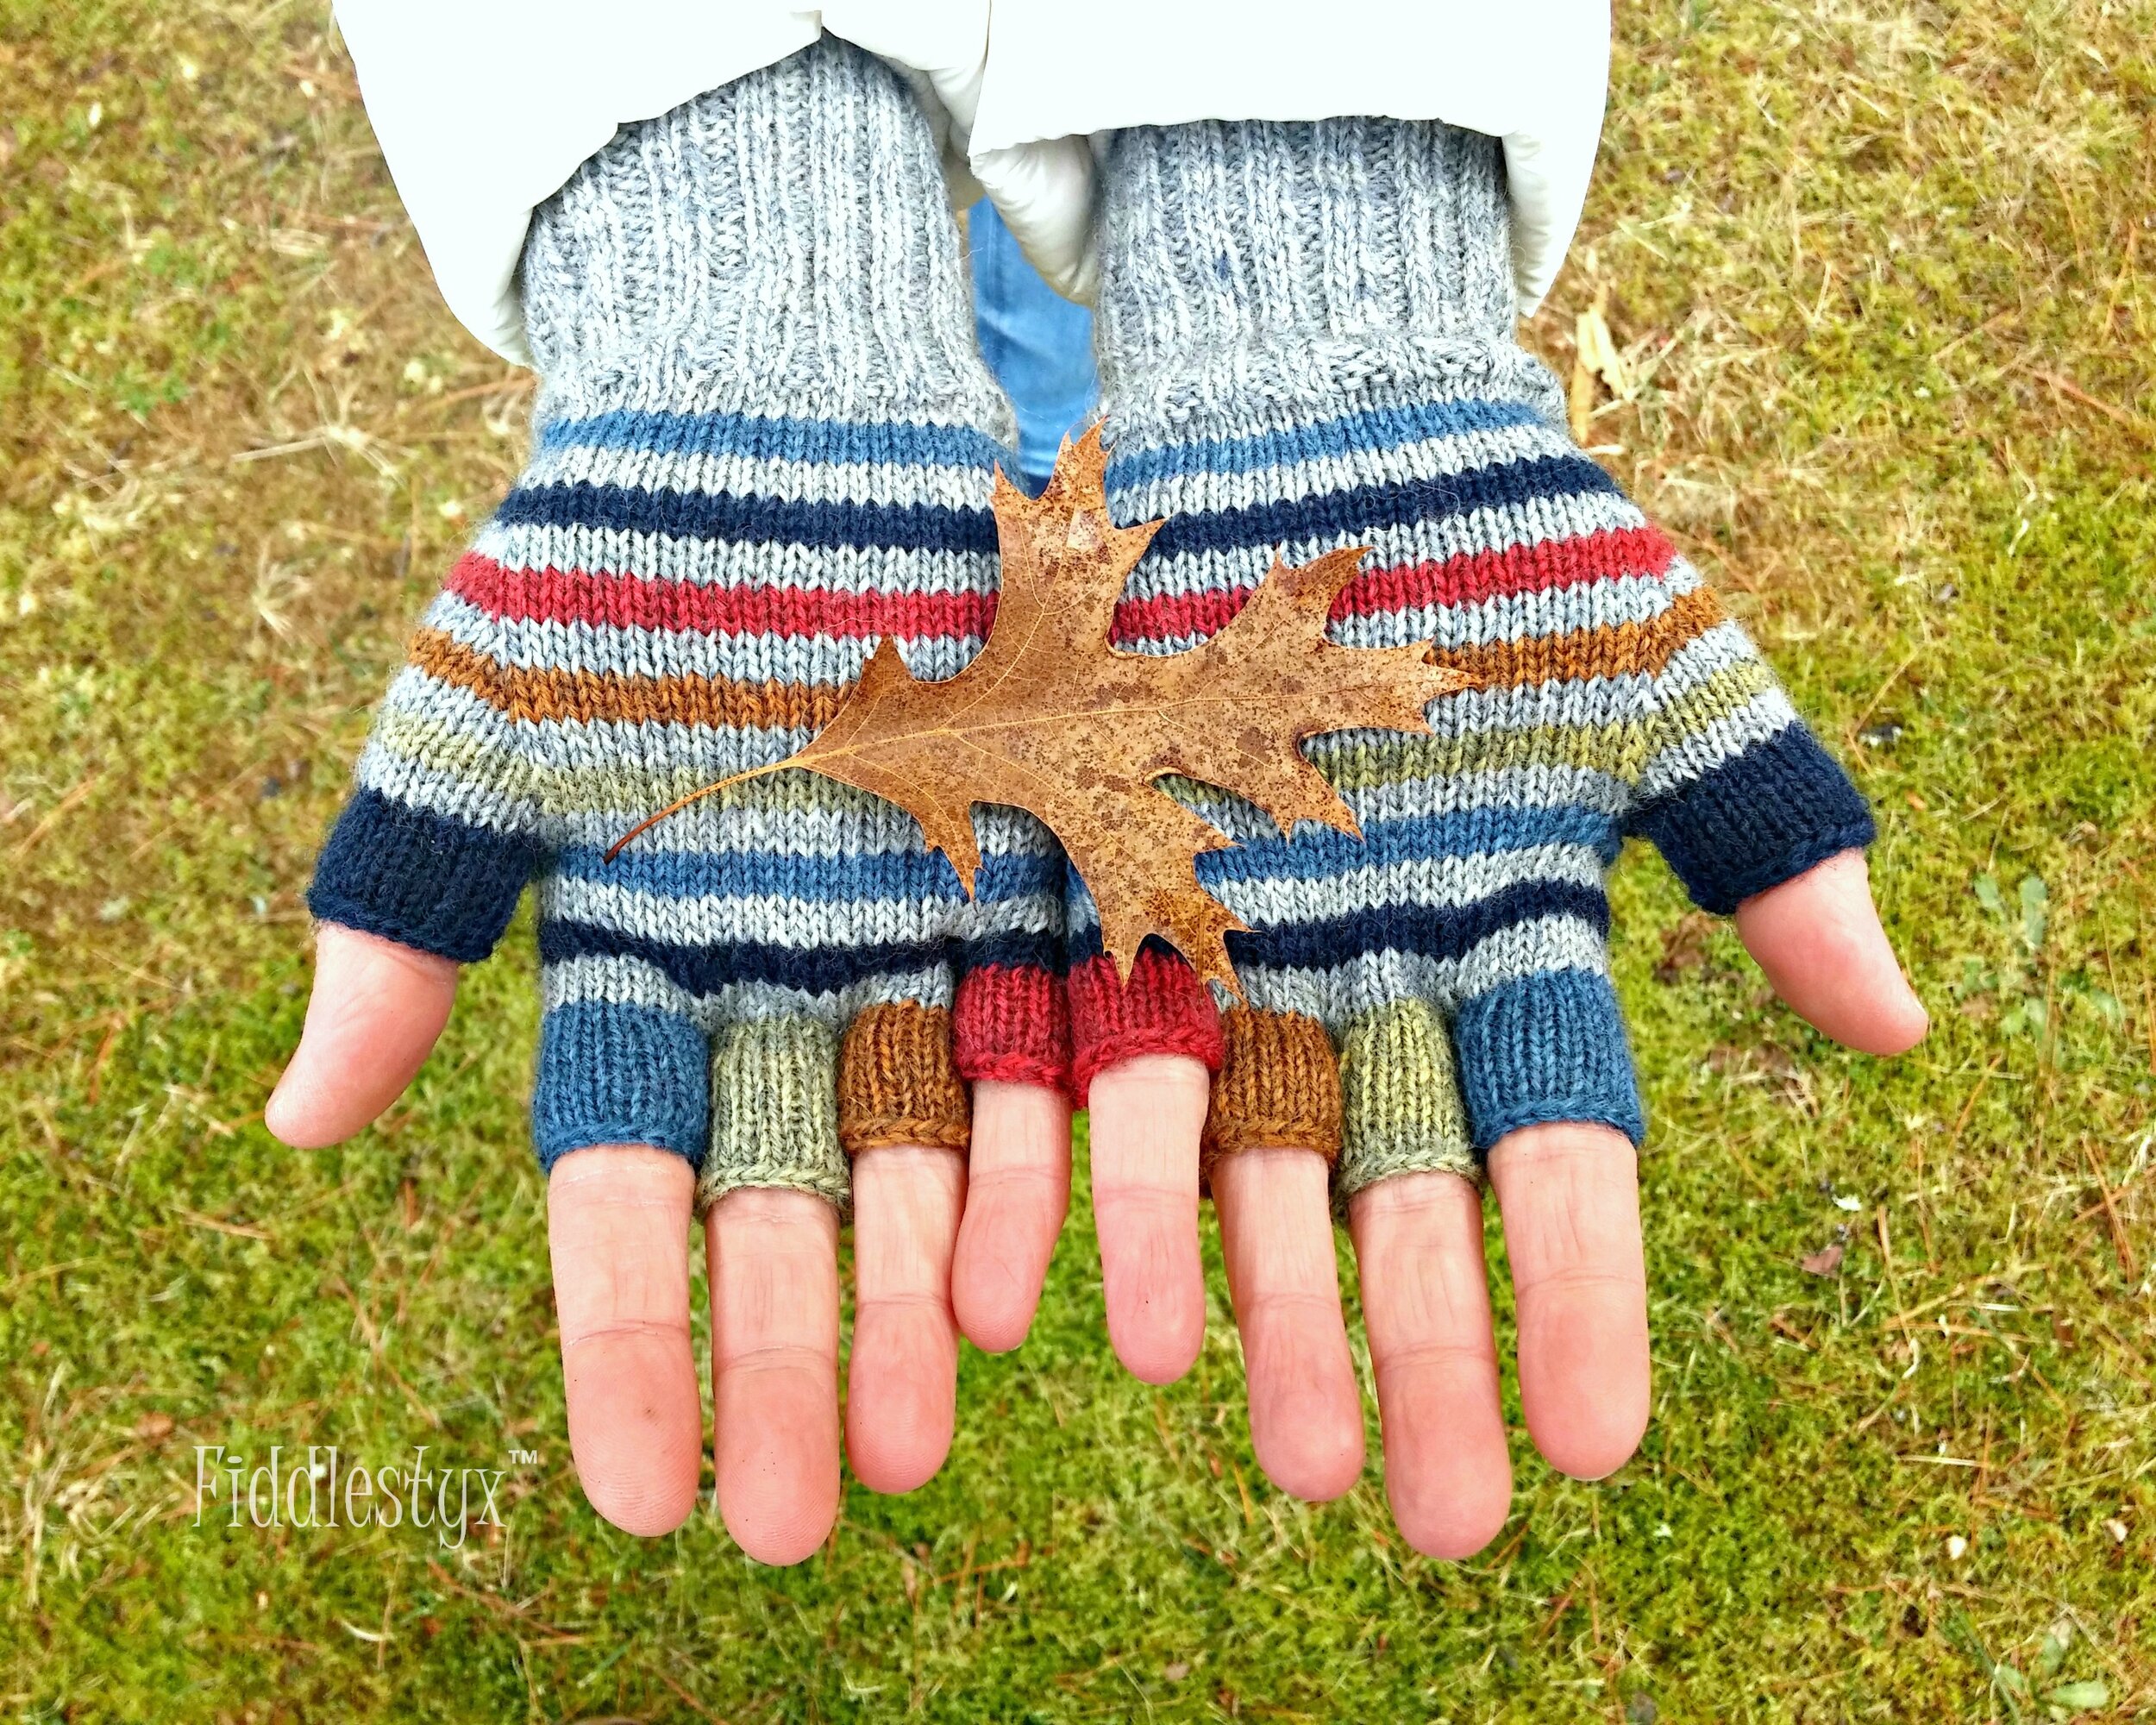 Scrappy Mitts